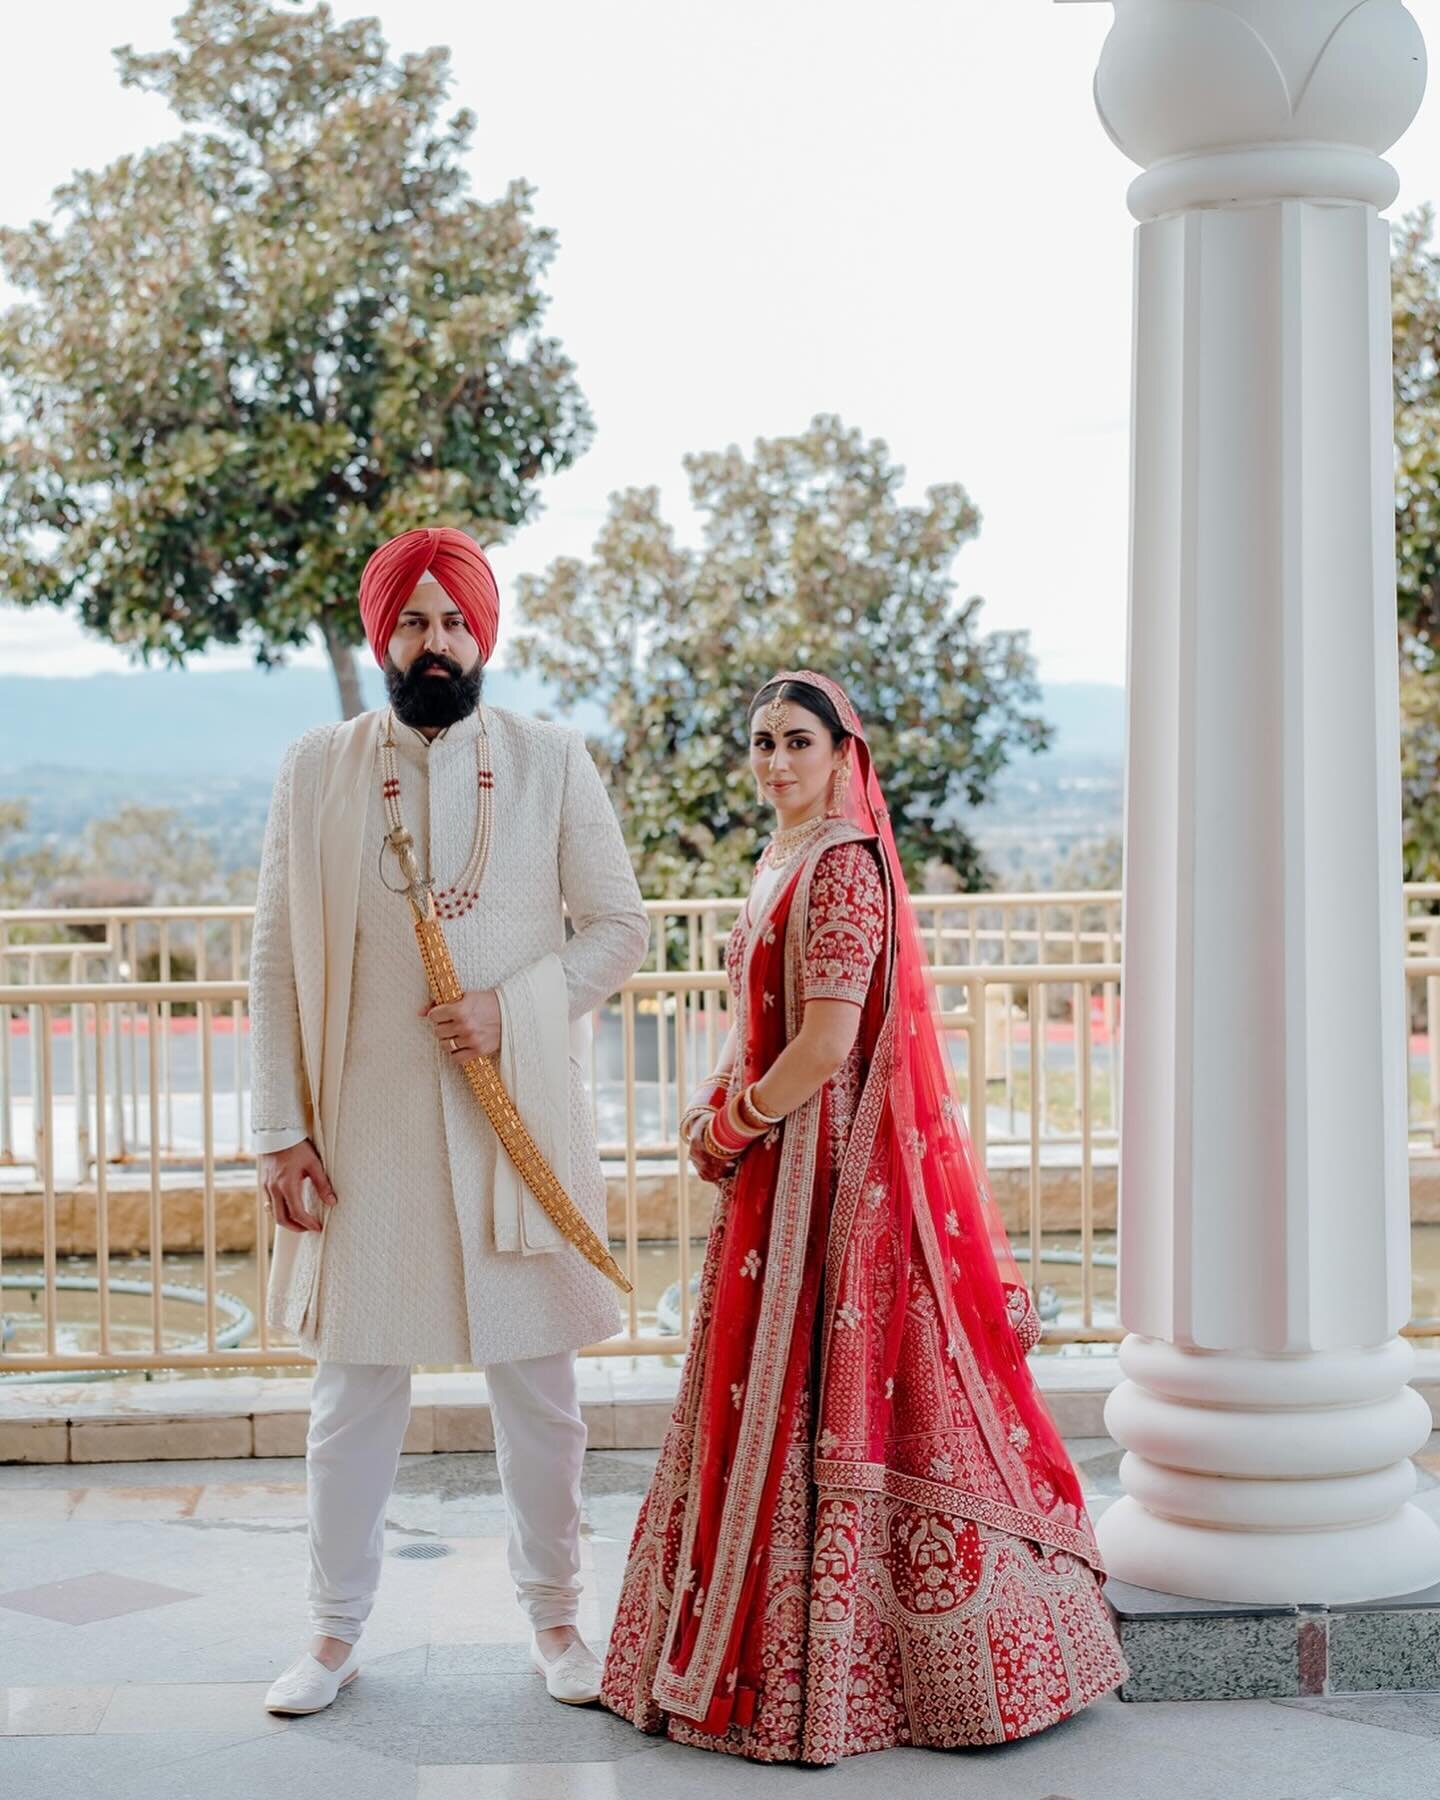 Sachi and Sean are a radiant fusion of Sikh and Persian love, adorned in elegance. Saachi shines in the dress &lsquo;Oshun&rsquo; embodying the goddess of divinity, while Sean graces an ivory sherwani. With a union as celestial as their attire, this 